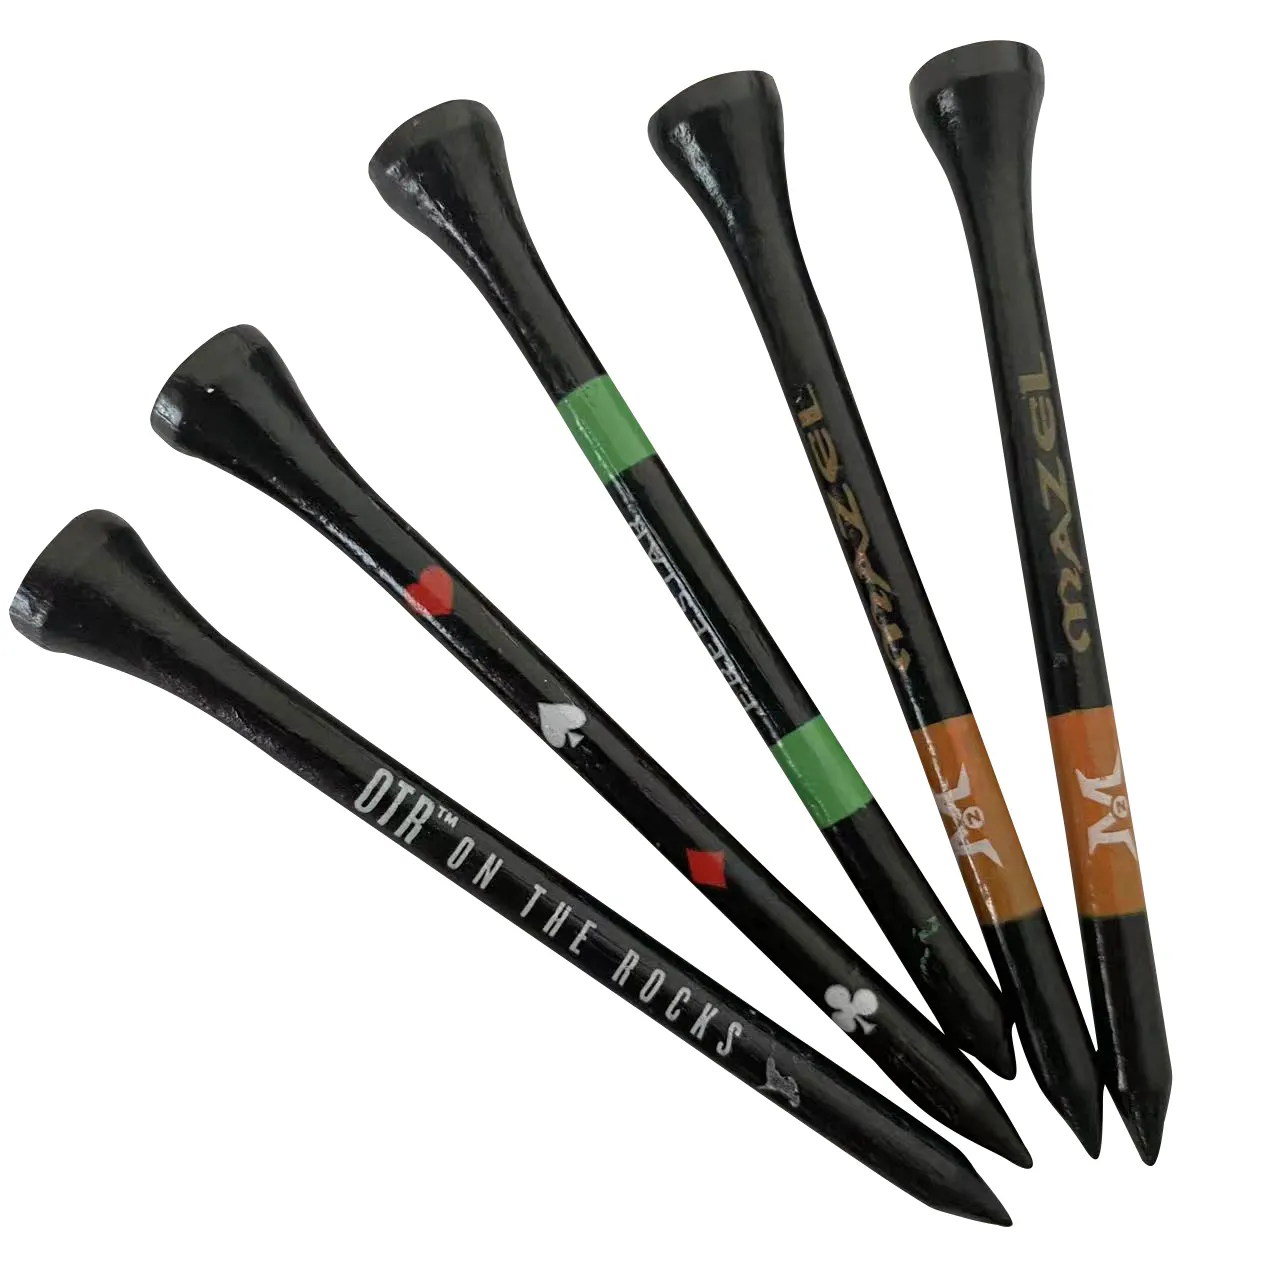 Unique coloured Black Natural Hardwood Golf Tees with Logo in the Cup and Shank